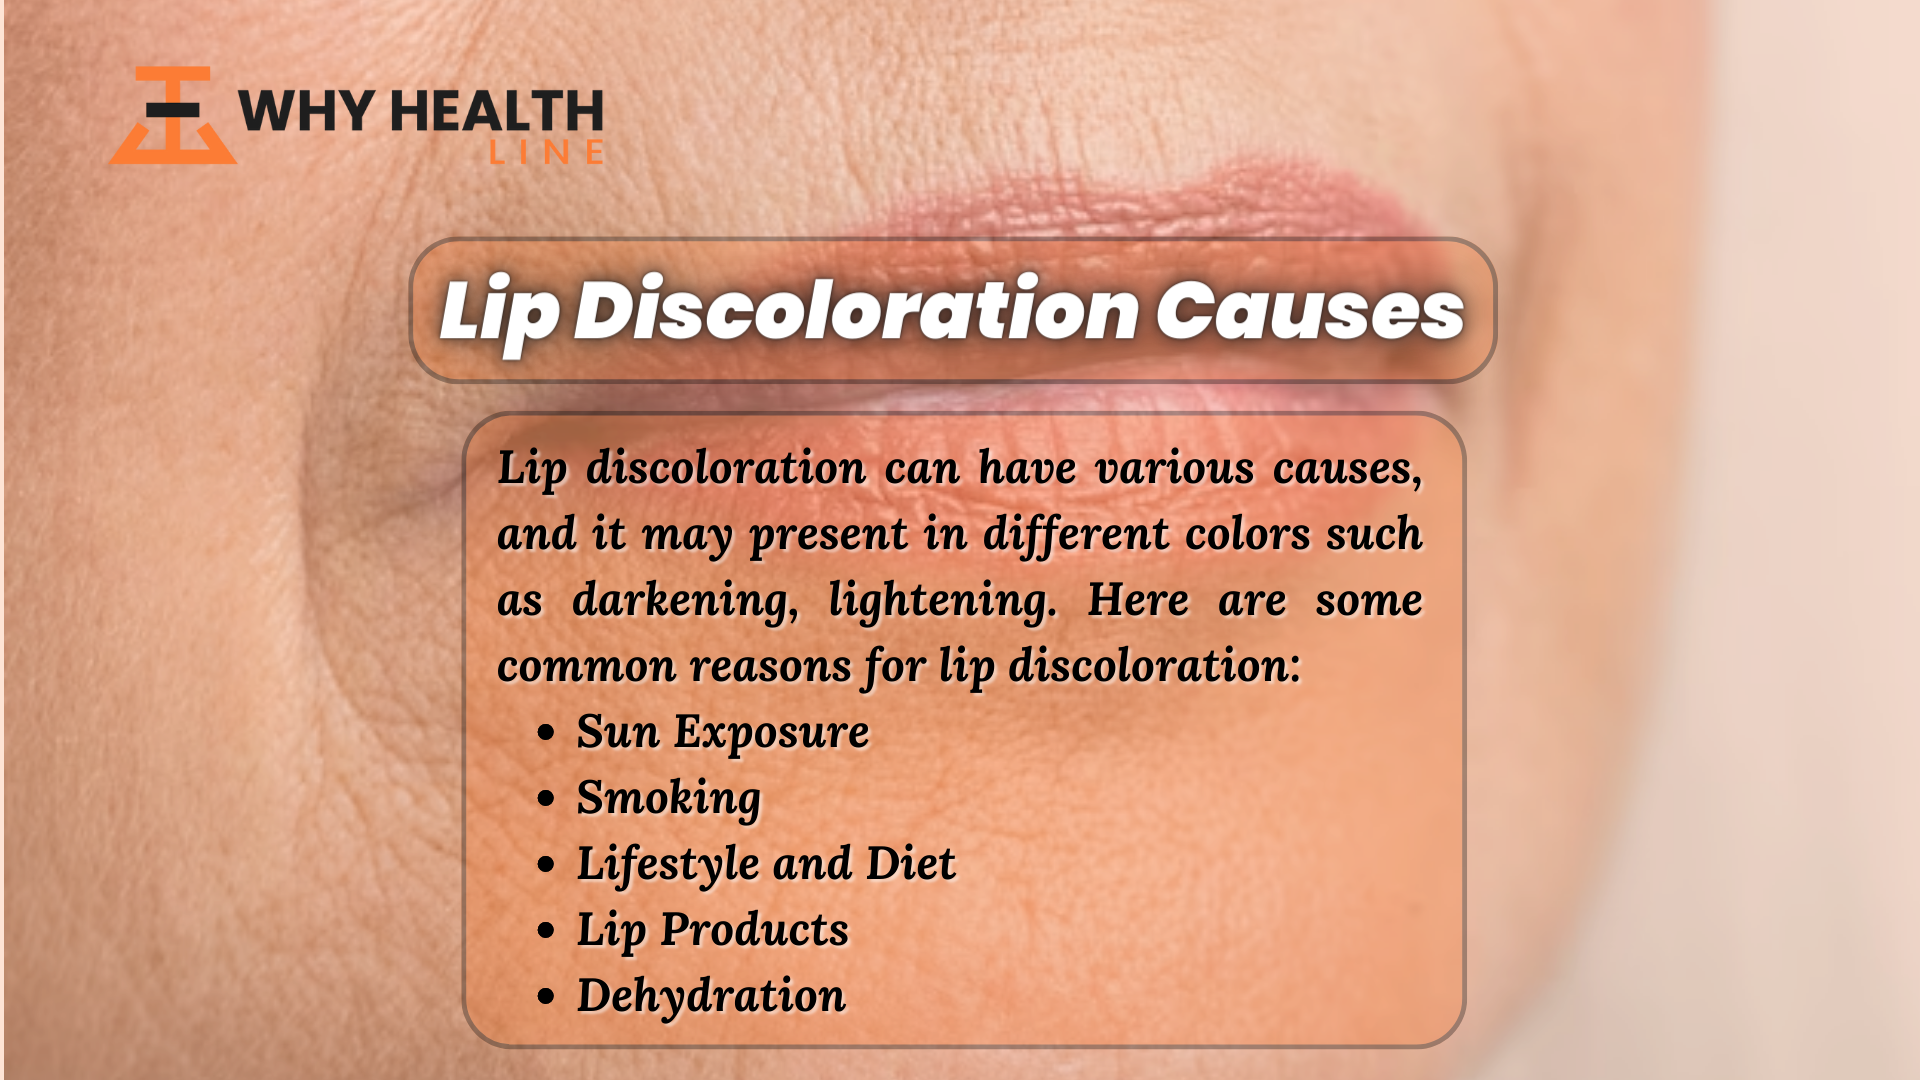 Lip Discoloration Causes